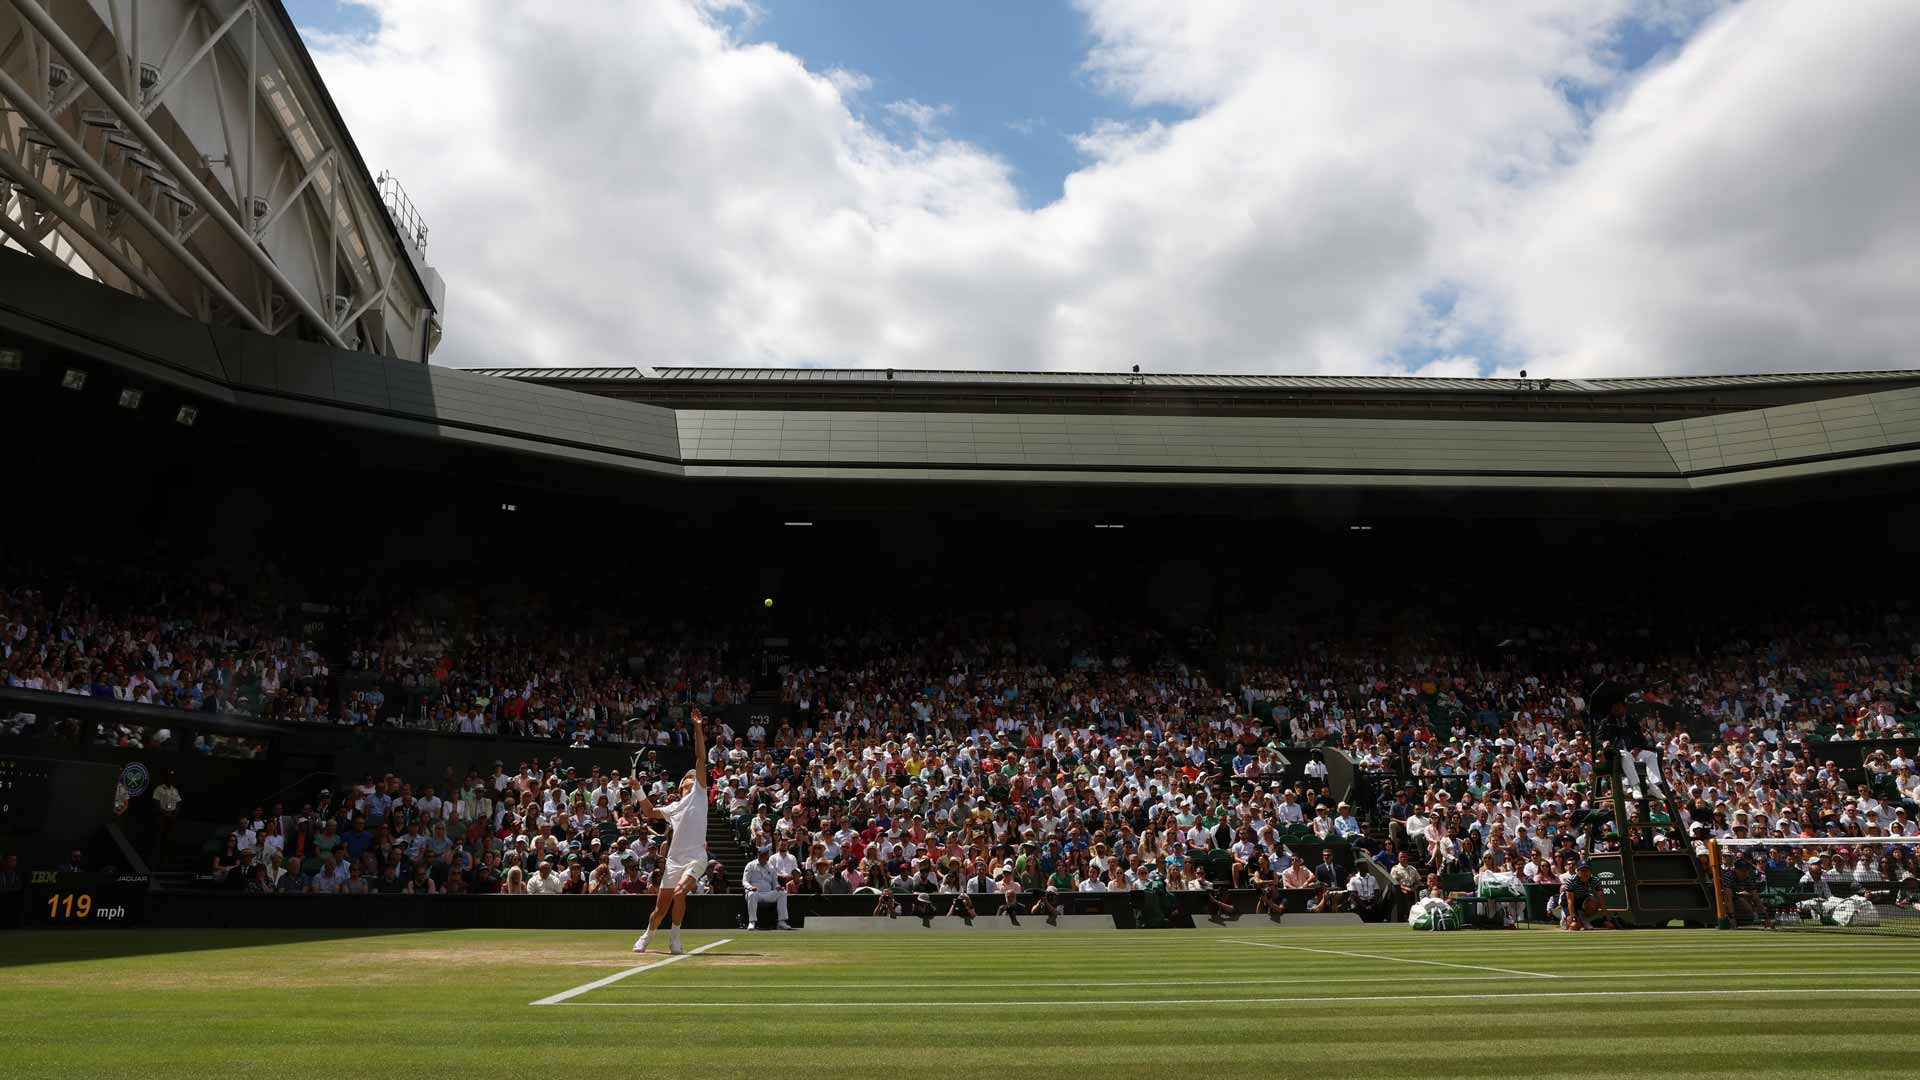 Wimbledon will be held from 3-16 July.